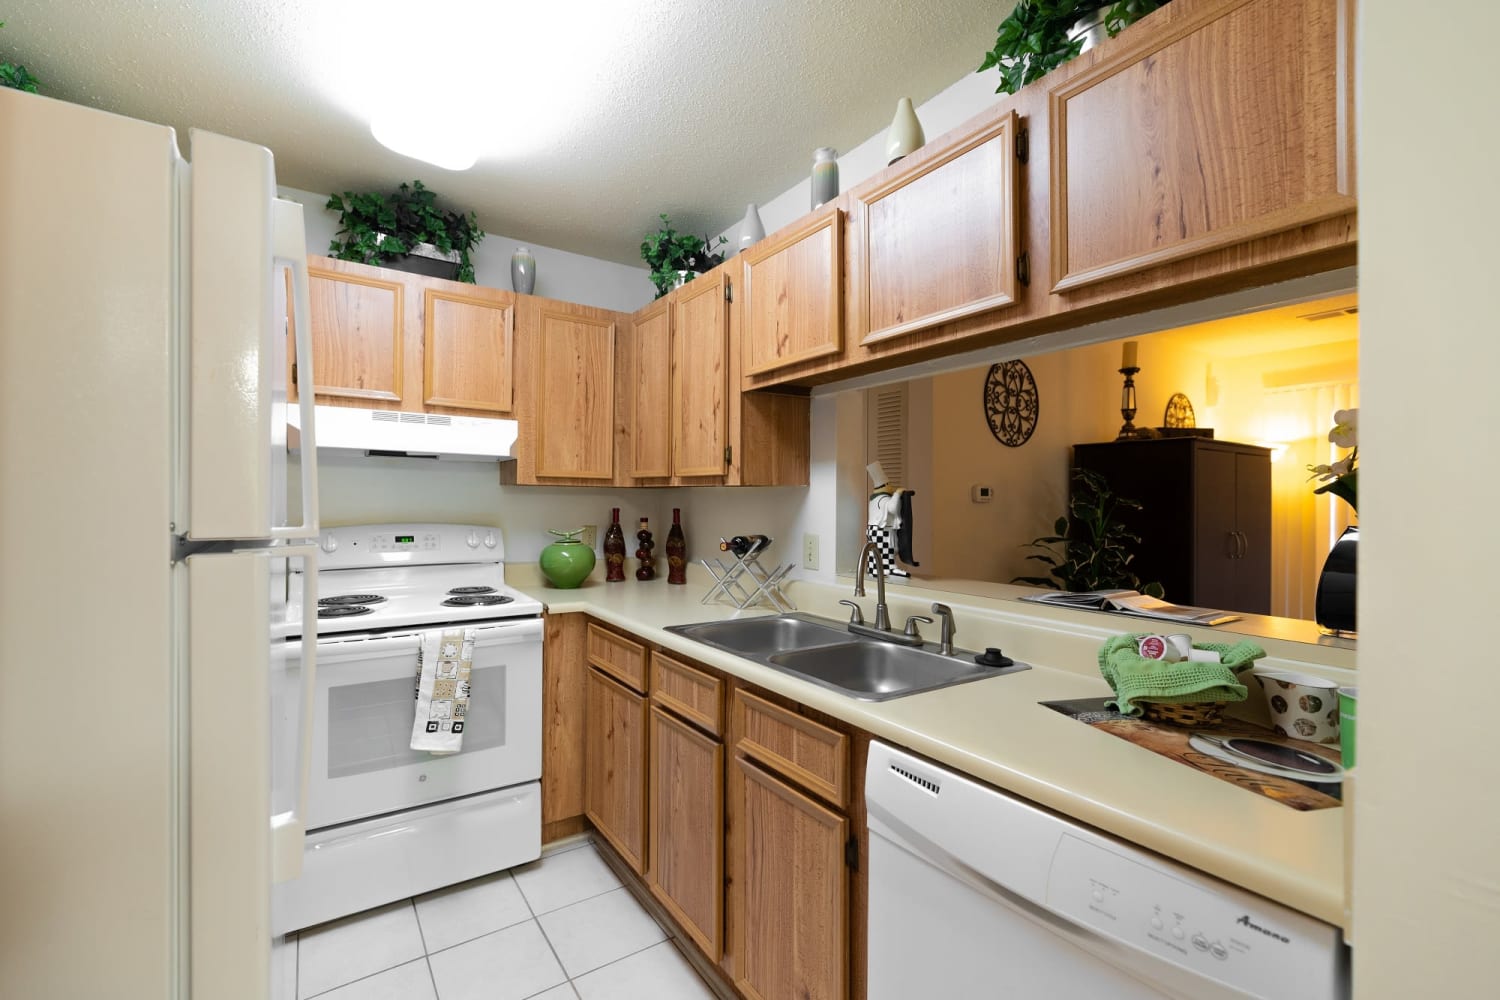 Fully equipped kitchen at Verandas on the Green Apartment Homes in Aiken, South Carolina